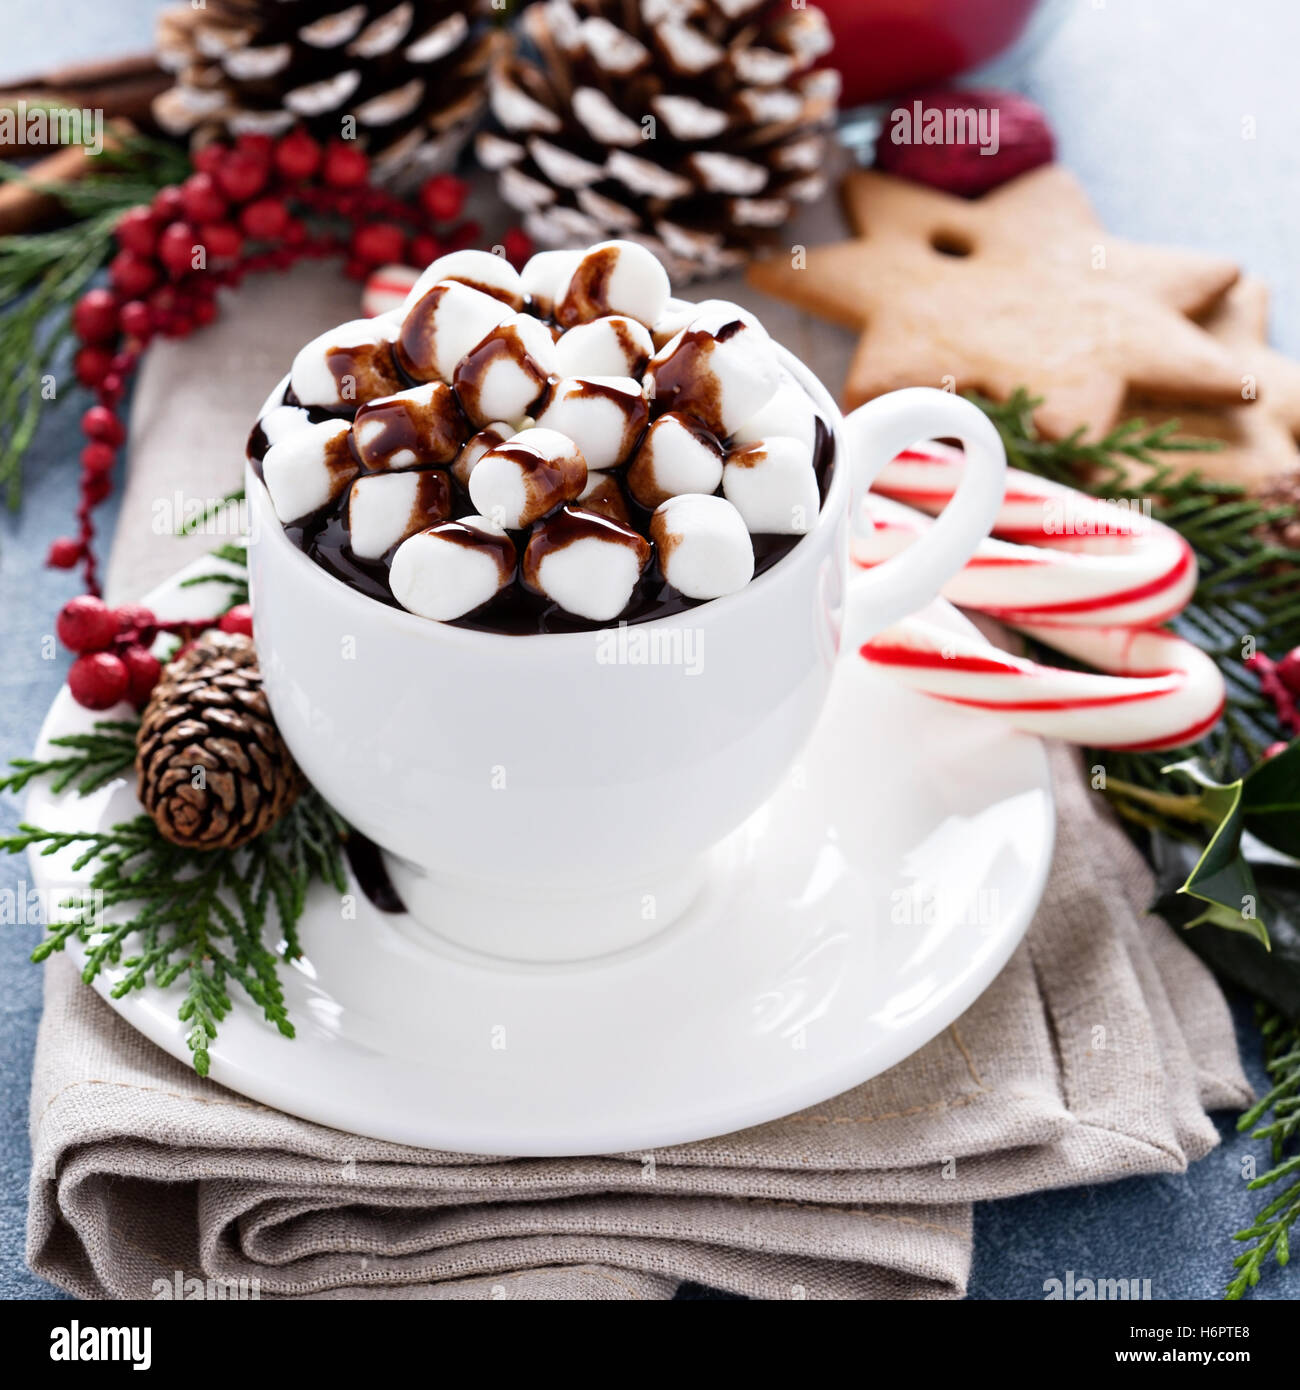 18+ Thousand Chocolat Chaud Noël Royalty-Free Images, Stock Photos &  Pictures